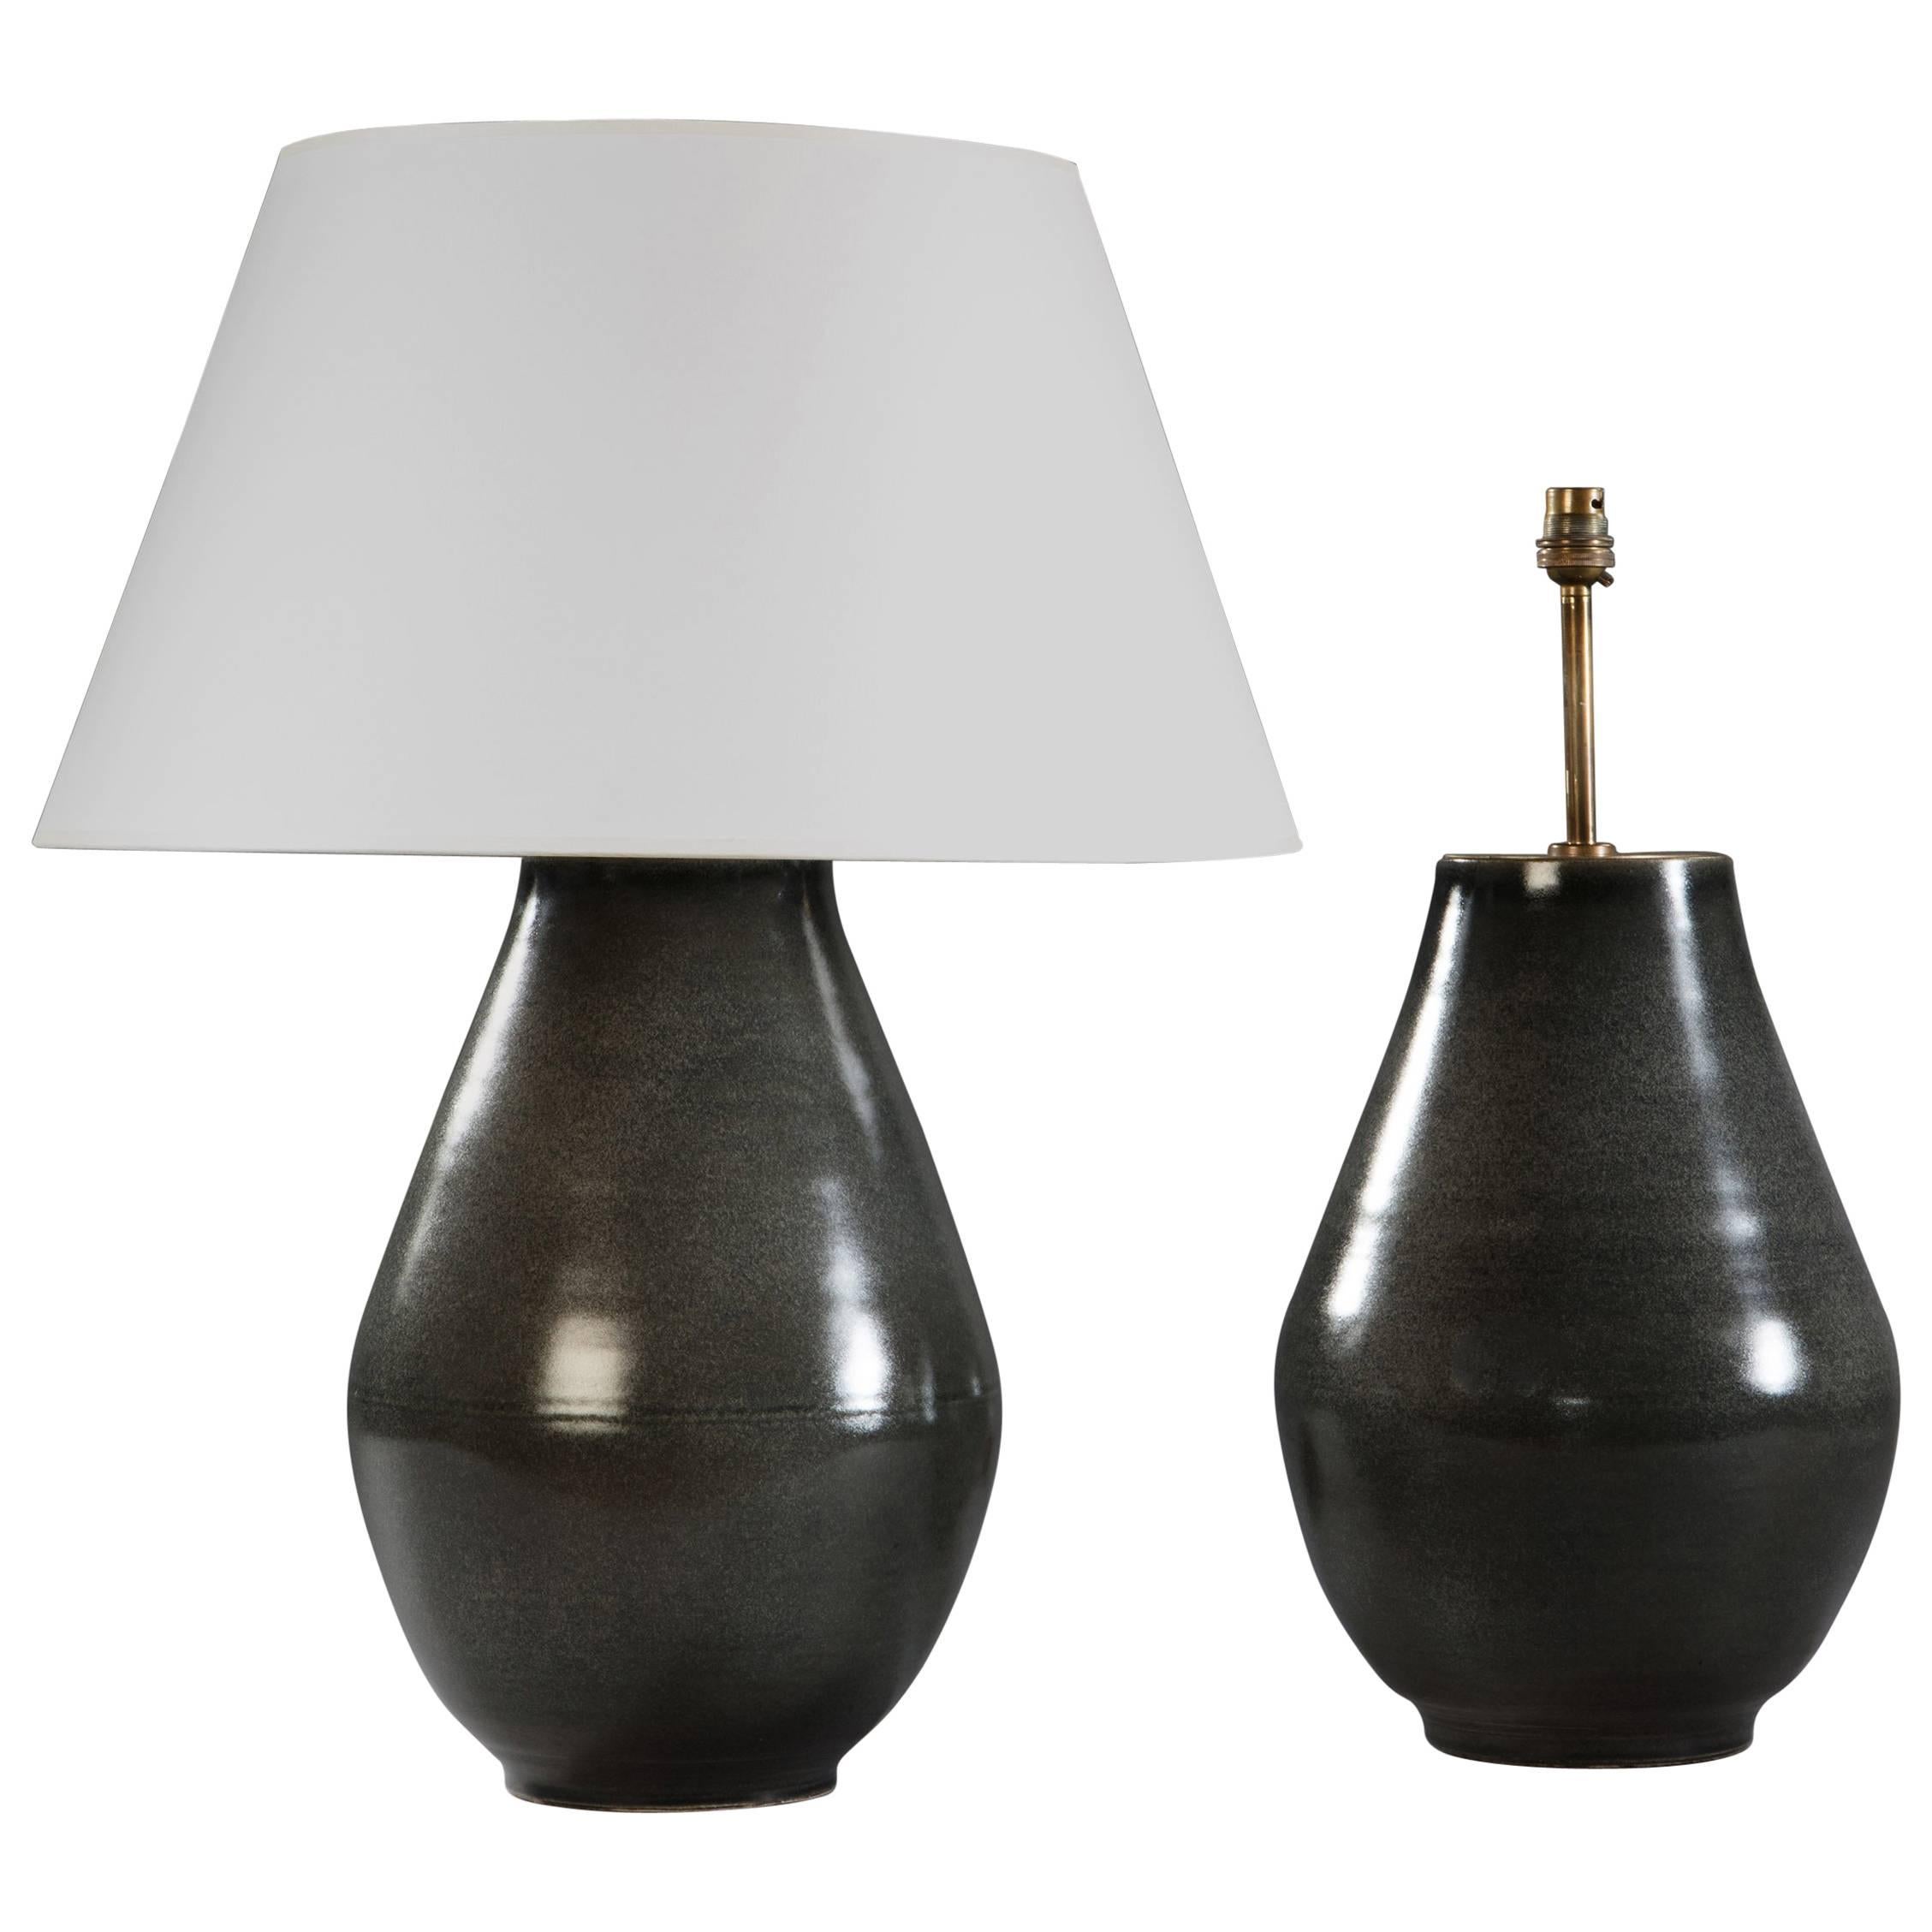 Pair of Grey Glaze Pottery Lamps